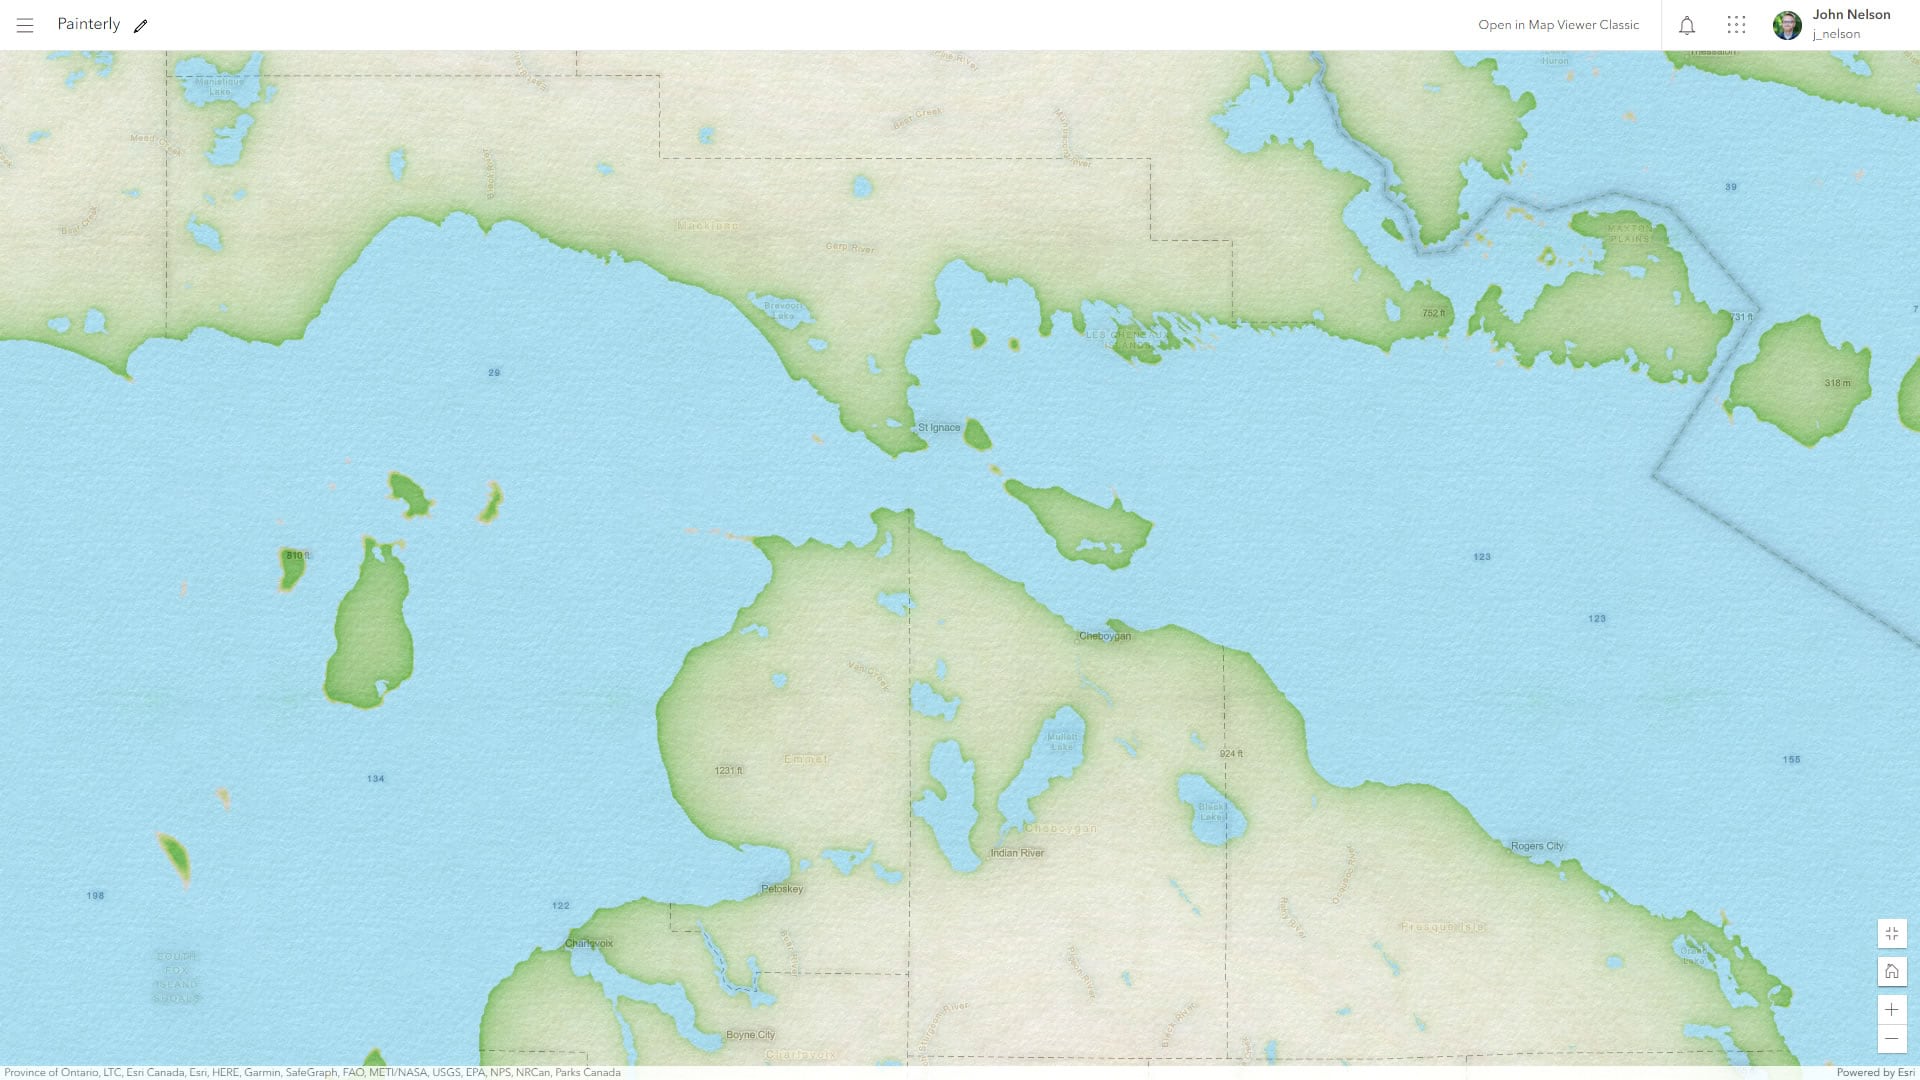 Painterly basemap in ArcGIS Online